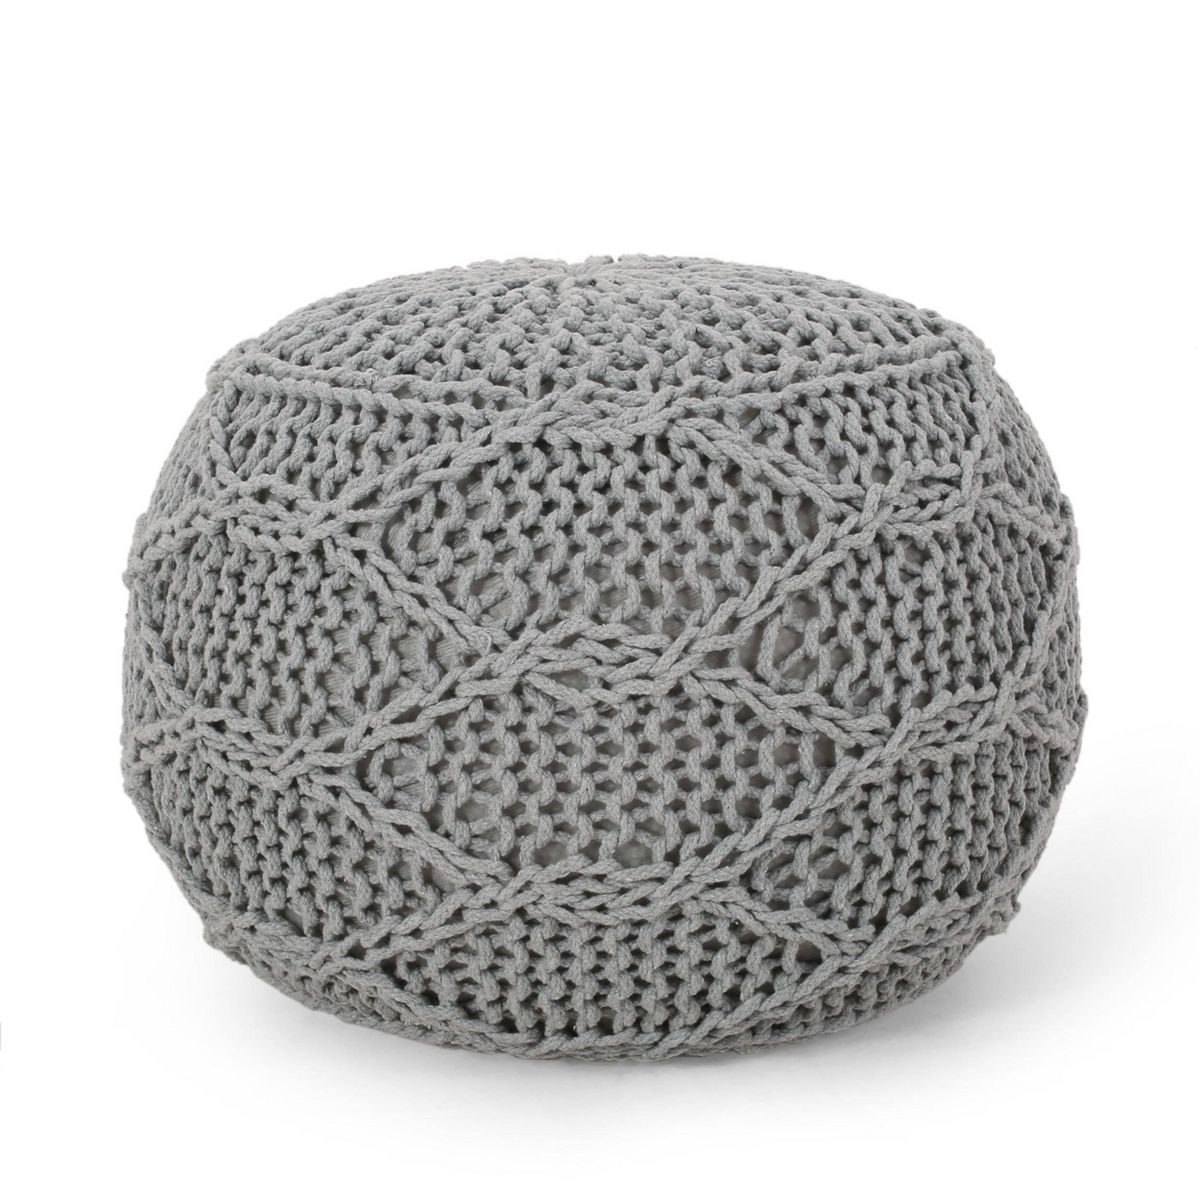 Morven Modern Knitted Cotton Round Pouf - Christopher Knight Home | Target